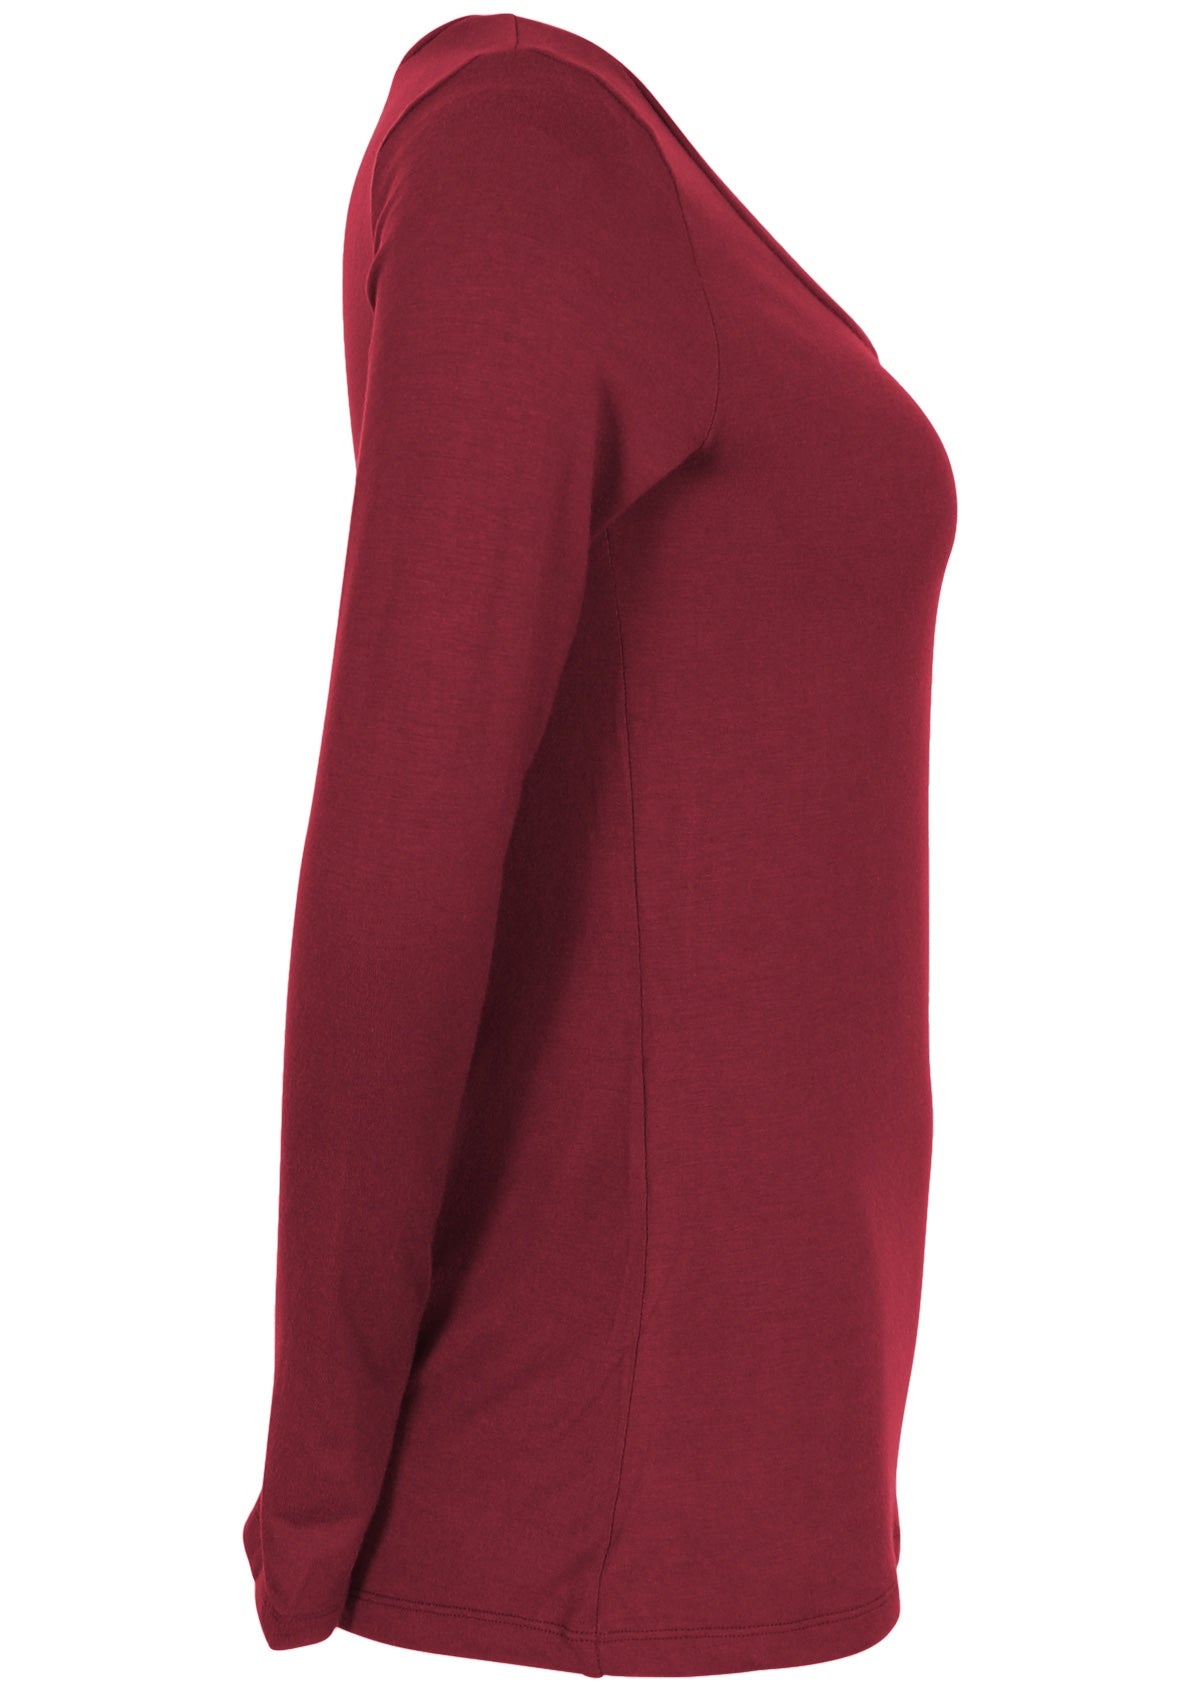 Side view of women's maroon long sleeve stretch v-neck soft rayon top.